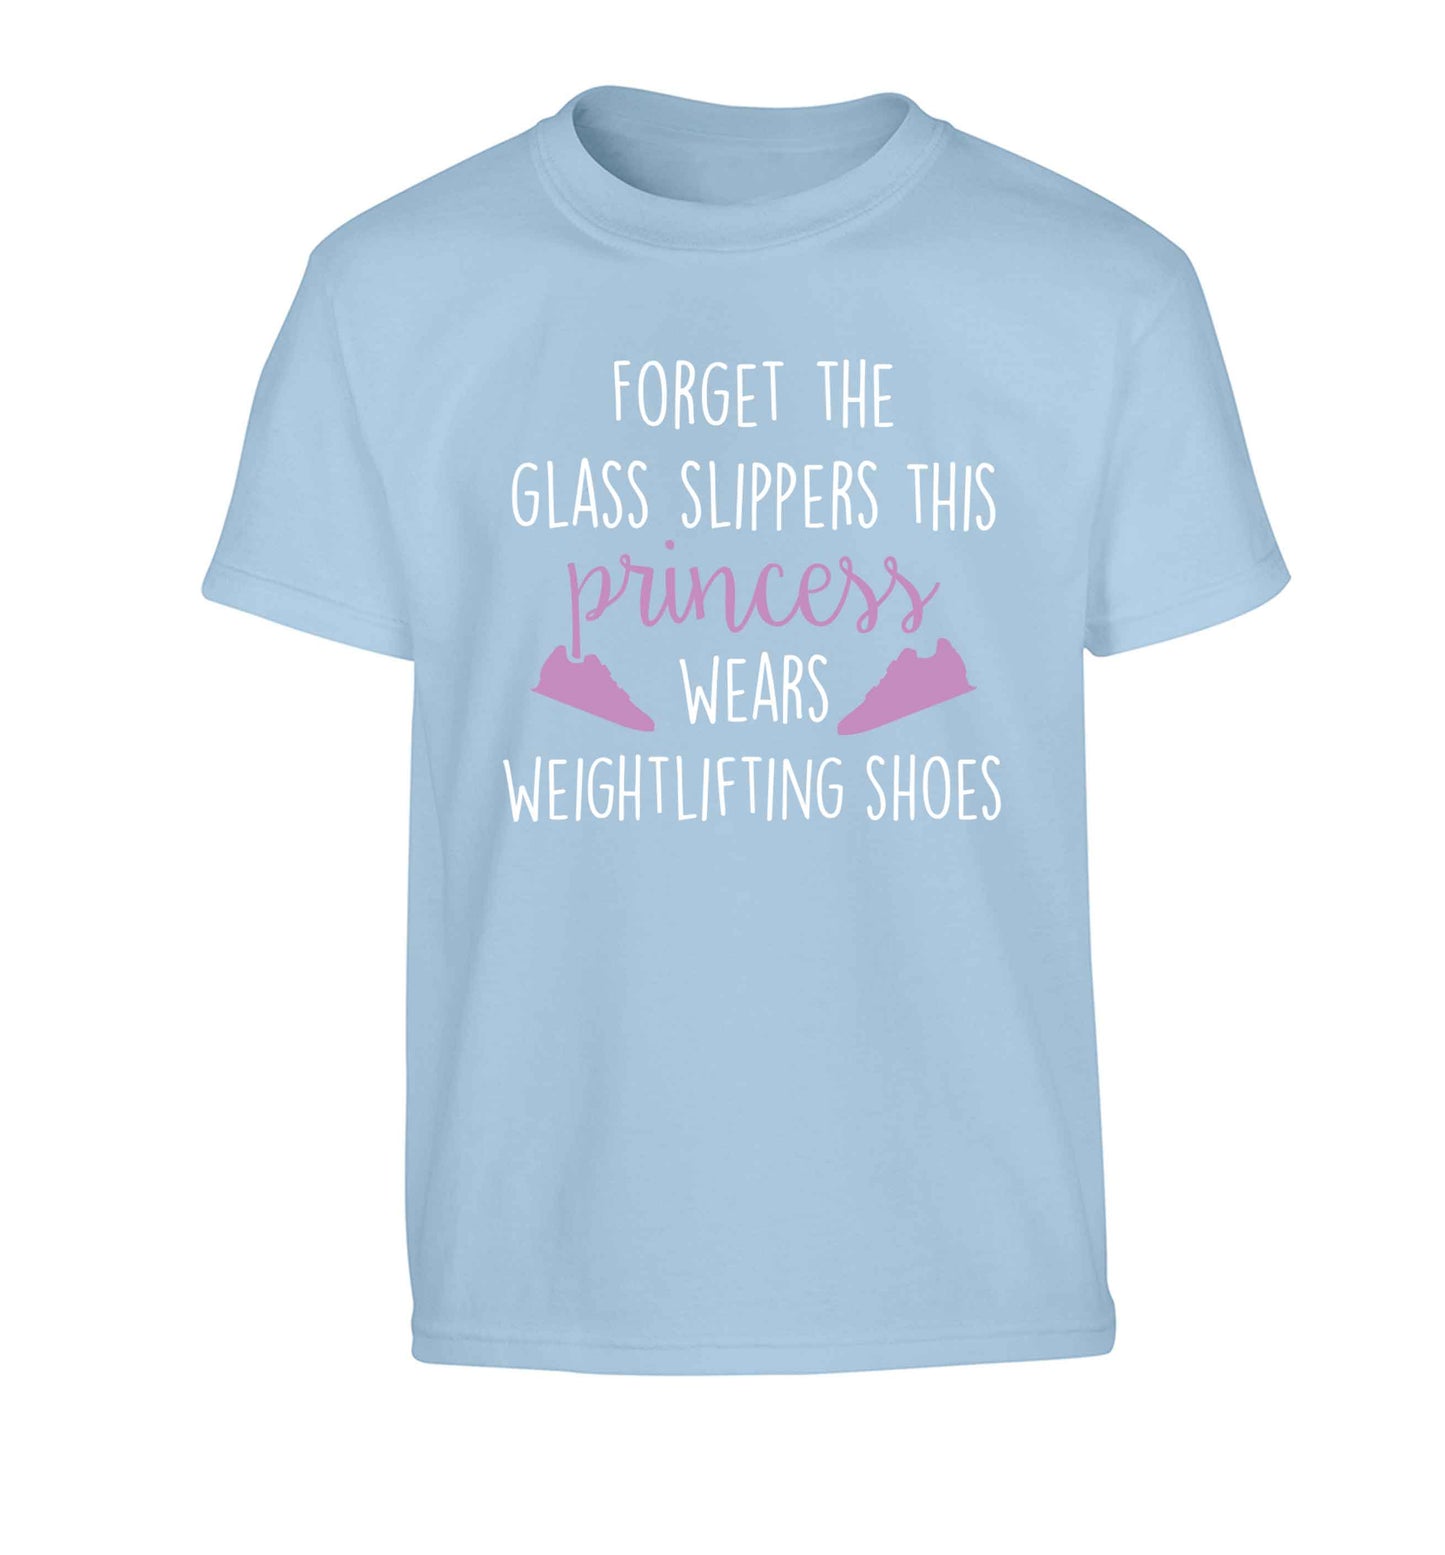 Forget the glass slippers this princess wears weightlifting shoes Children's light blue Tshirt 12-13 Years